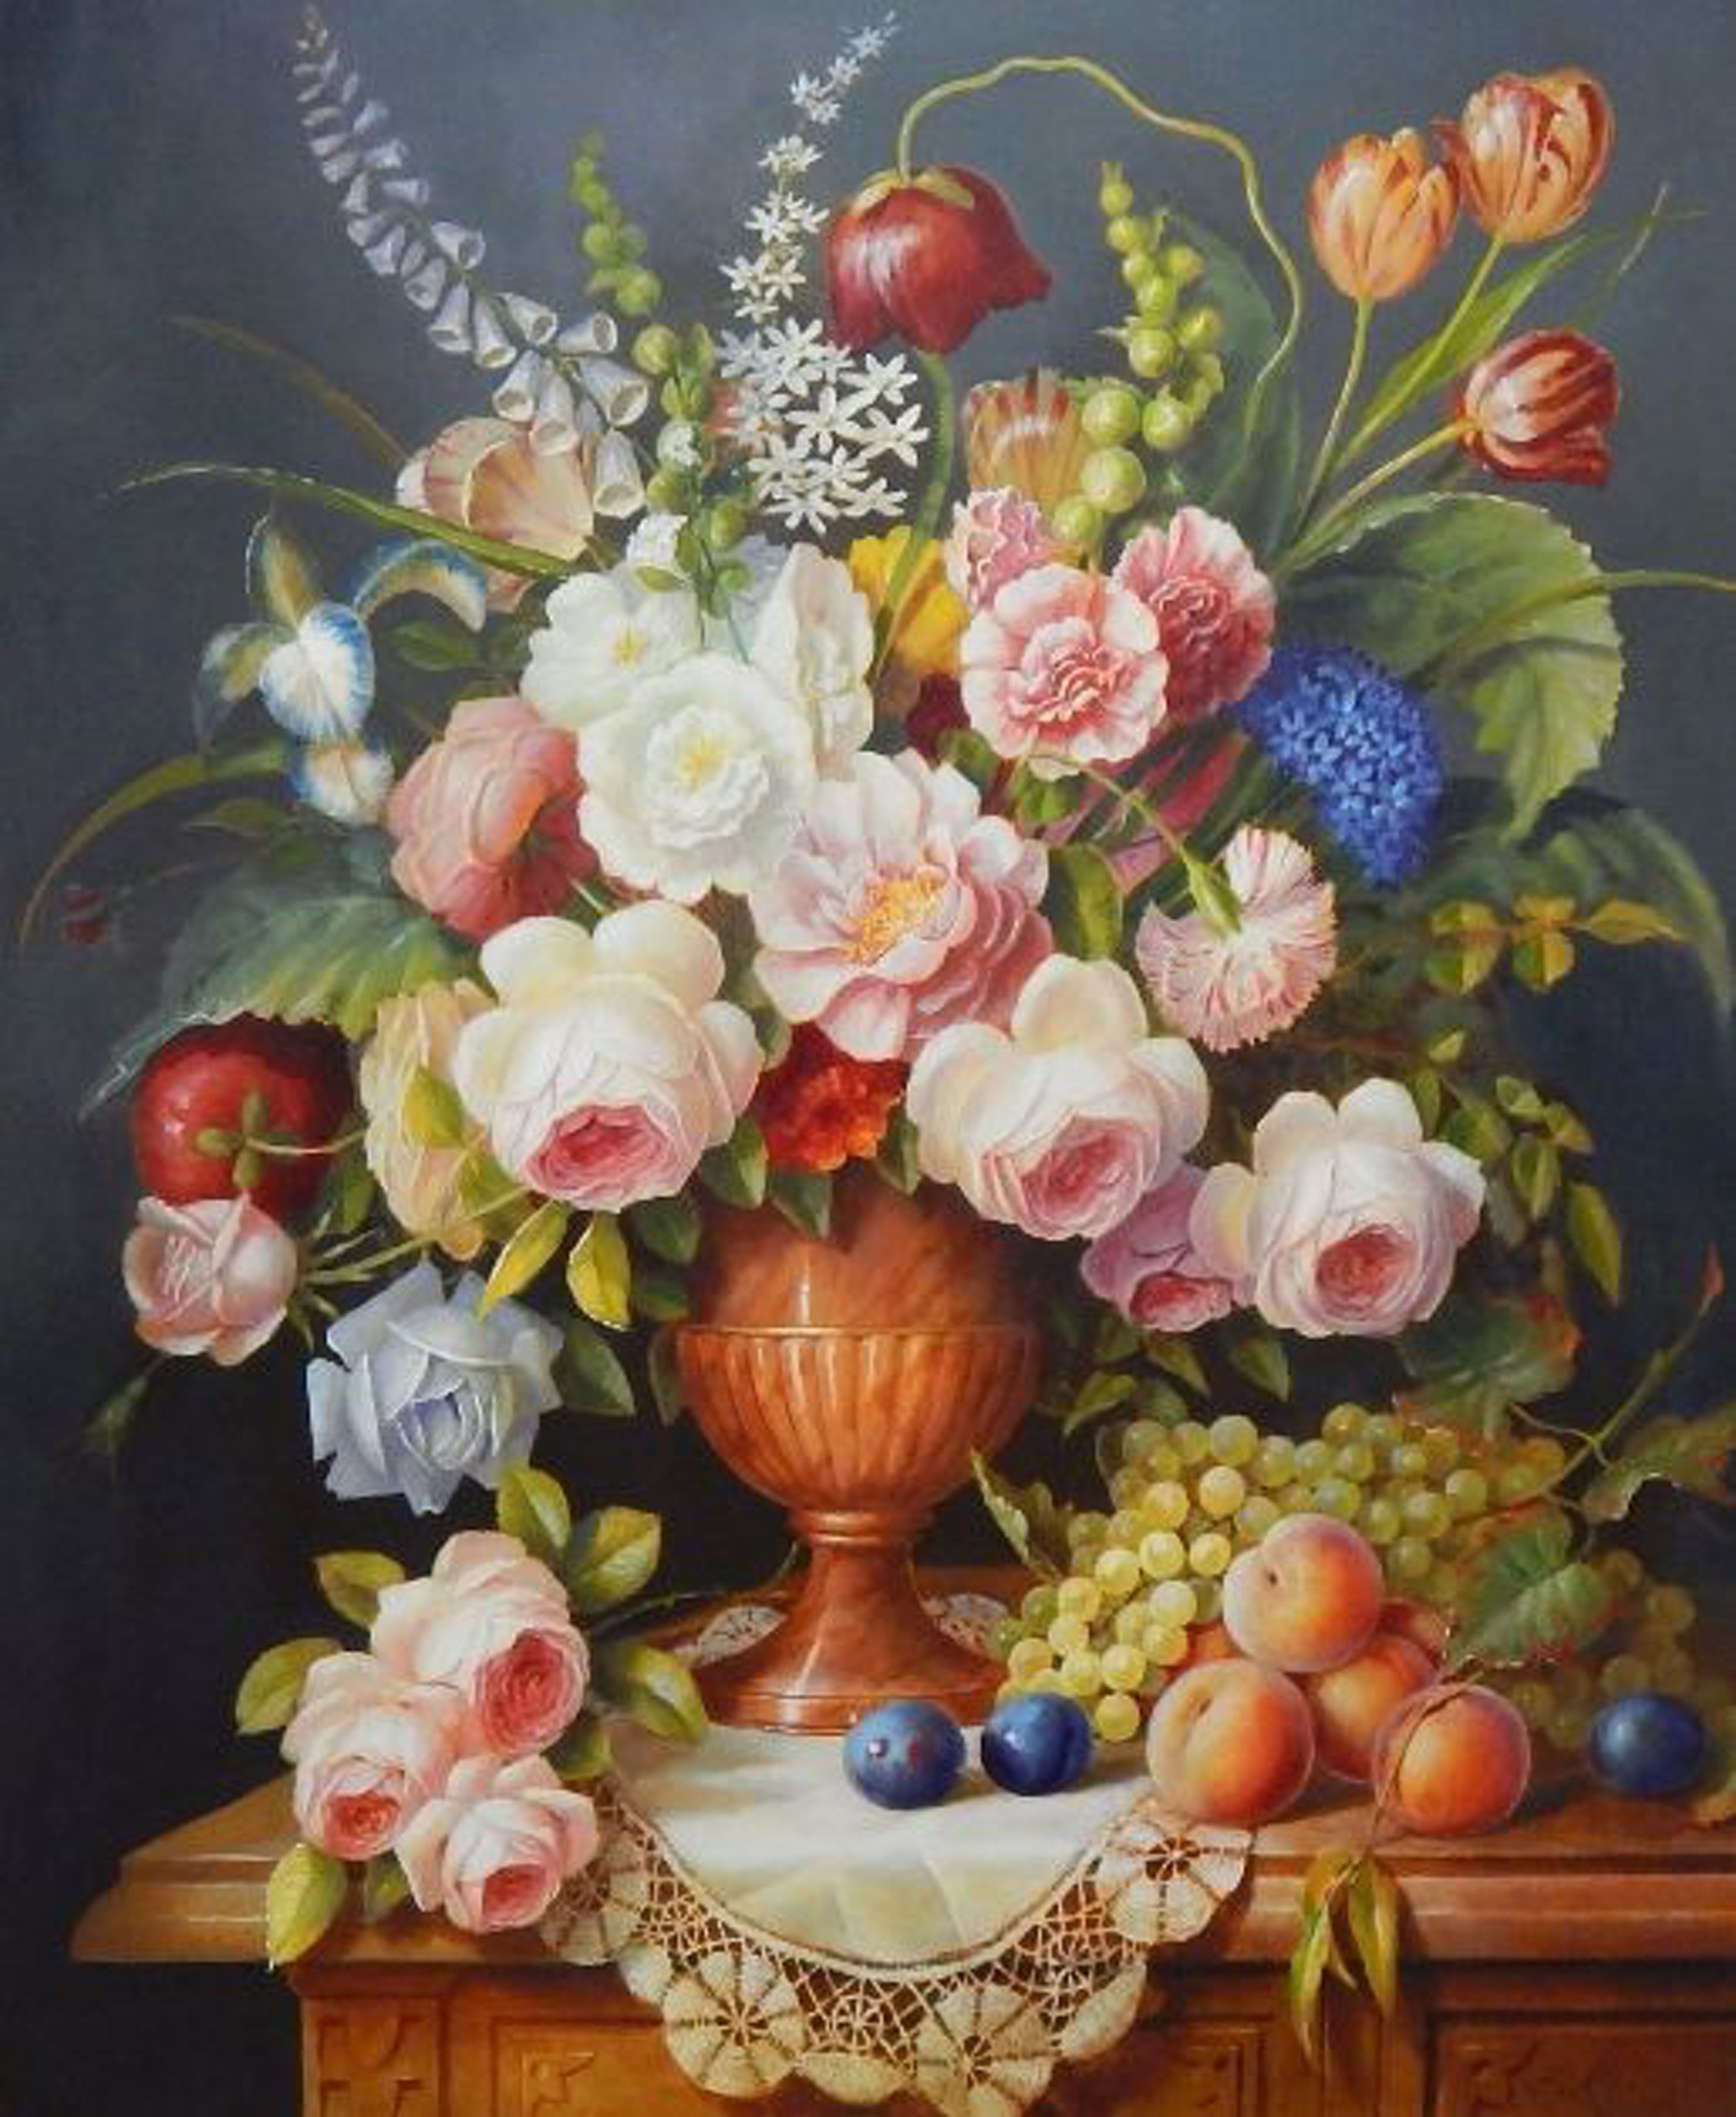 "A regal bouquet with assorted fruits" by Jos Kivits